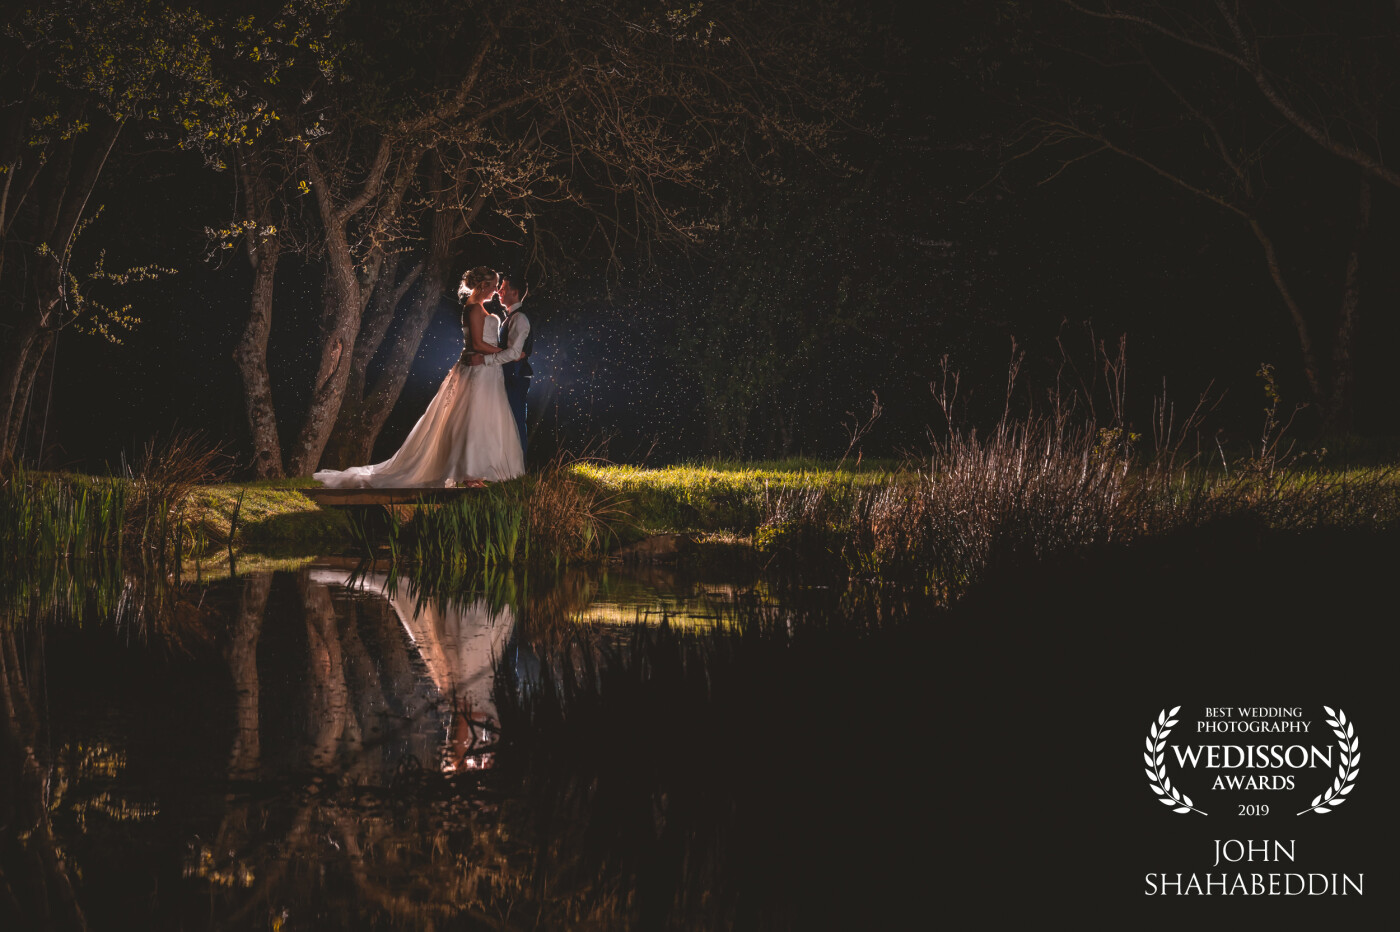 When exploring a beautiful country farm venue in the Lake District, UK, I just knew that this lake, with it's gorgeous little bridge and fairy tale setting, would need to be shot at night. I came back after dark with the couple in tow to capture it. "It was worth the wet toes!" the bride said after seeing the image. I wholeheartedly agree! 